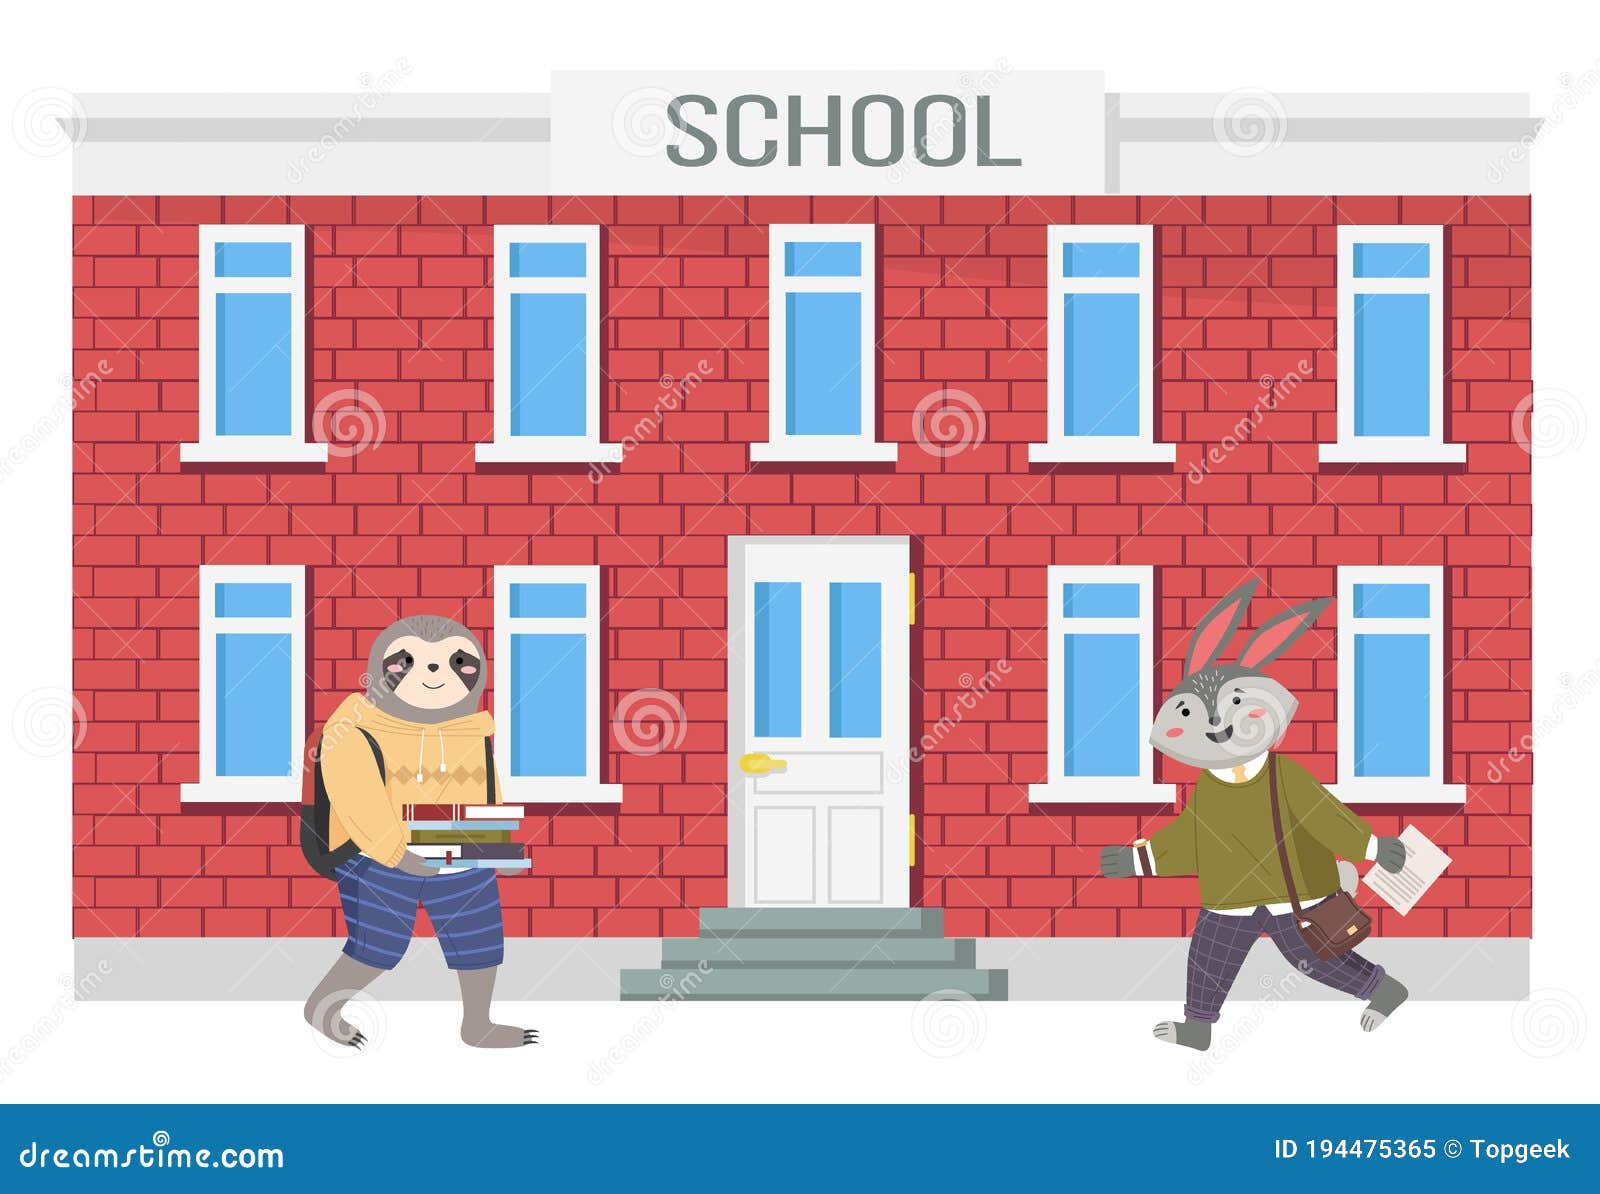 Children Go To Study. Illustration of Animals Students Near School  Building. Funny Cartoon Schoolkid Stock Vector - Illustration of chairs,  clipart: 194475365